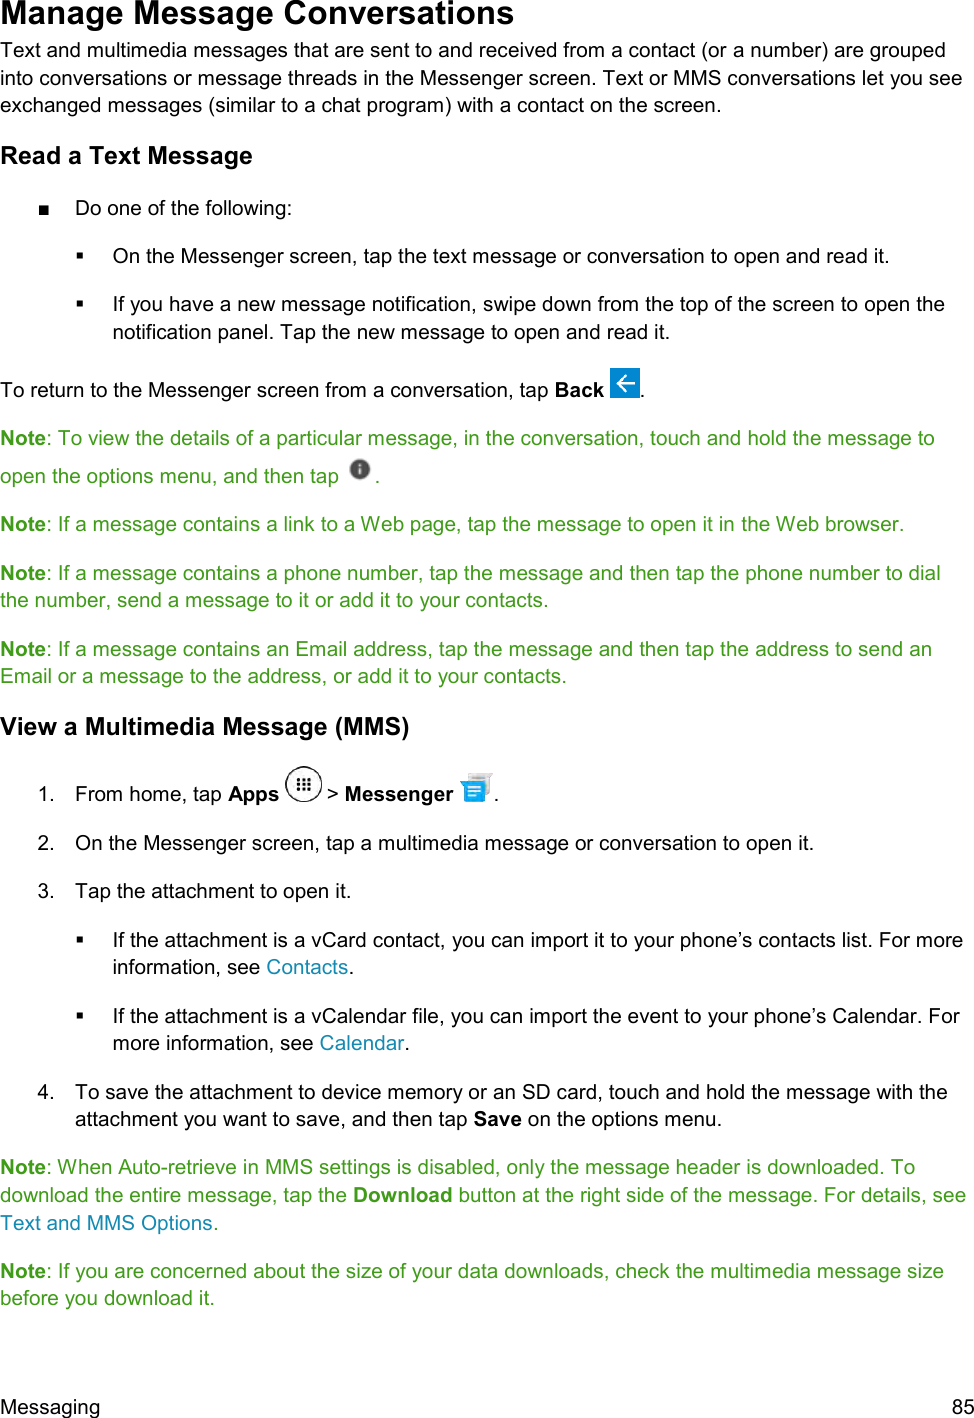  Messaging  85 Manage Message Conversations  Text and multimedia messages that are sent to and received from a contact (or a number) are grouped into conversations or message threads in the Messenger screen. Text or MMS conversations let you see exchanged messages (similar to a chat program) with a contact on the screen. Read a Text Message ■  Do one of the following:   On the Messenger screen, tap the text message or conversation to open and read it.   If you have a new message notification, swipe down from the top of the screen to open the notification panel. Tap the new message to open and read it. To return to the Messenger screen from a conversation, tap Back  . Note: To view the details of a particular message, in the conversation, touch and hold the message to open the options menu, and then tap . Note: If a message contains a link to a Web page, tap the message to open it in the Web browser. Note: If a message contains a phone number, tap the message and then tap the phone number to dial the number, send a message to it or add it to your contacts. Note: If a message contains an Email address, tap the message and then tap the address to send an Email or a message to the address, or add it to your contacts. View a Multimedia Message (MMS) 1.  From home, tap Apps   &gt; Messenger  . 2.  On the Messenger screen, tap a multimedia message or conversation to open it. 3.  Tap the attachment to open it.    If the attachment is a vCard contact, you can import it to your phone’s contacts list. For more information, see Contacts.    If the attachment is a vCalendar file, you can import the event to your phone’s Calendar. For more information, see Calendar. 4.  To save the attachment to device memory or an SD card, touch and hold the message with the attachment you want to save, and then tap Save on the options menu. Note: When Auto-retrieve in MMS settings is disabled, only the message header is downloaded. To download the entire message, tap the Download button at the right side of the message. For details, see Text and MMS Options. Note: If you are concerned about the size of your data downloads, check the multimedia message size before you download it. 